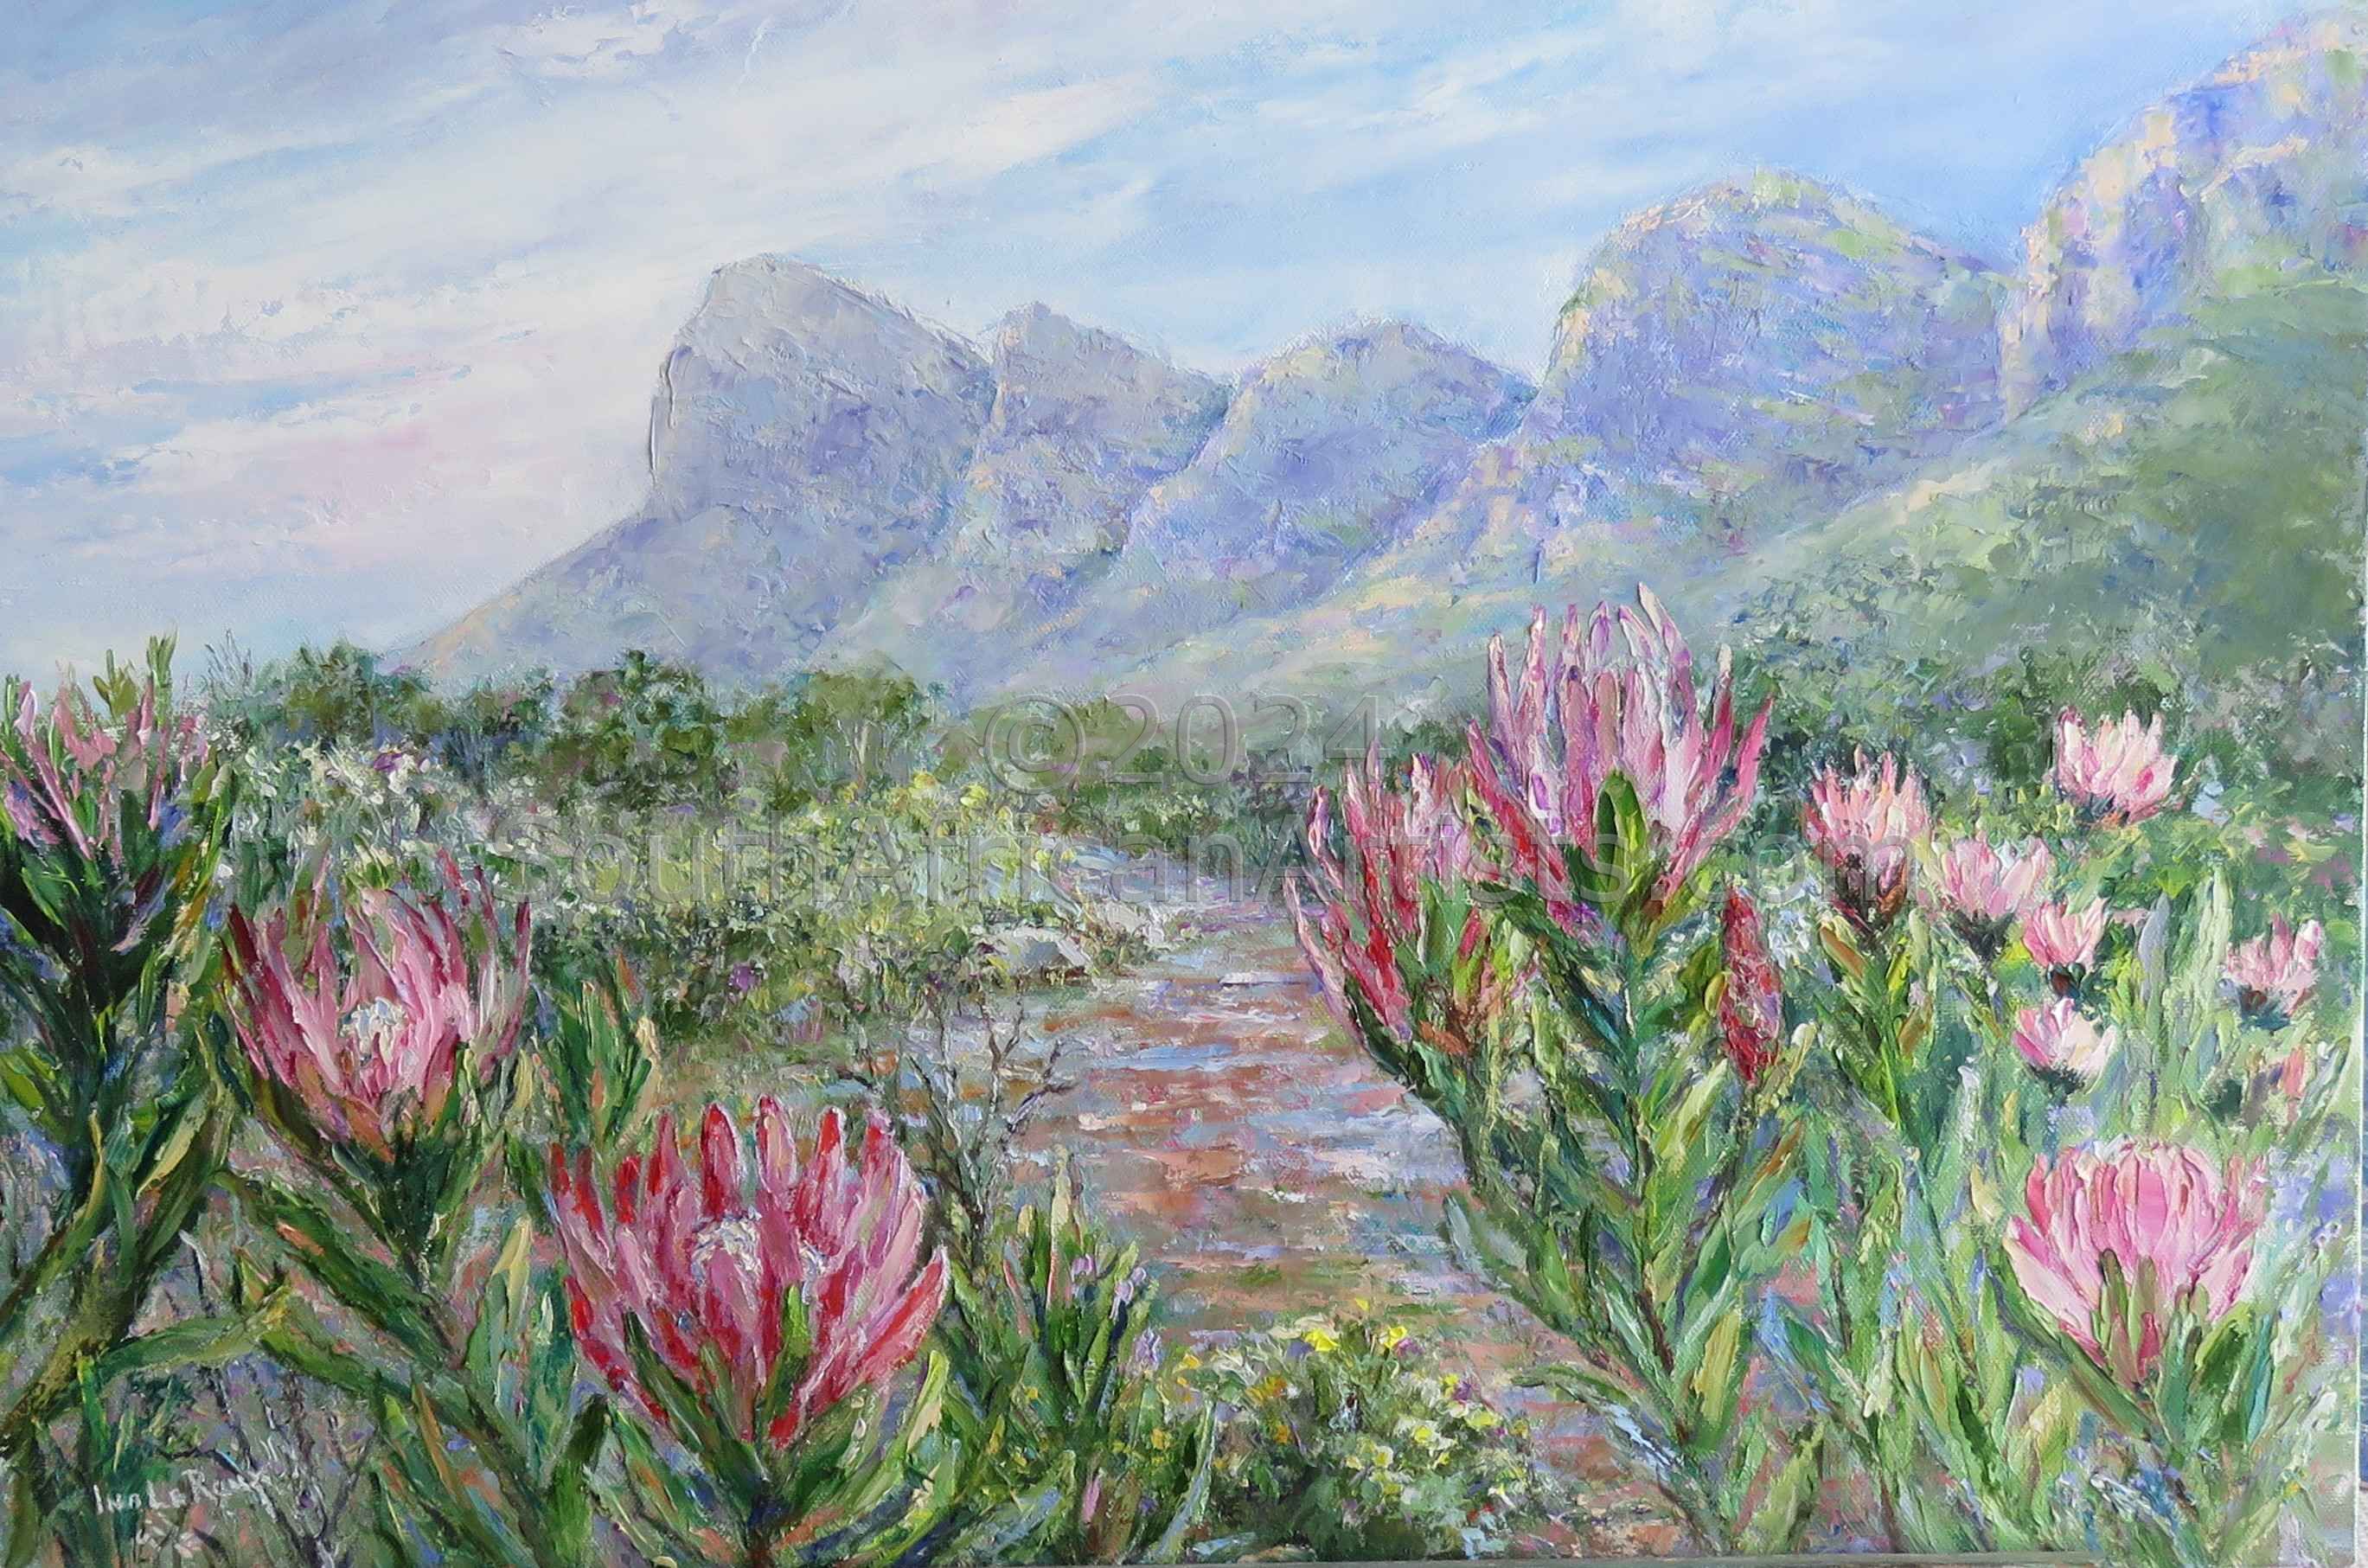 Proteas in Full Bloom